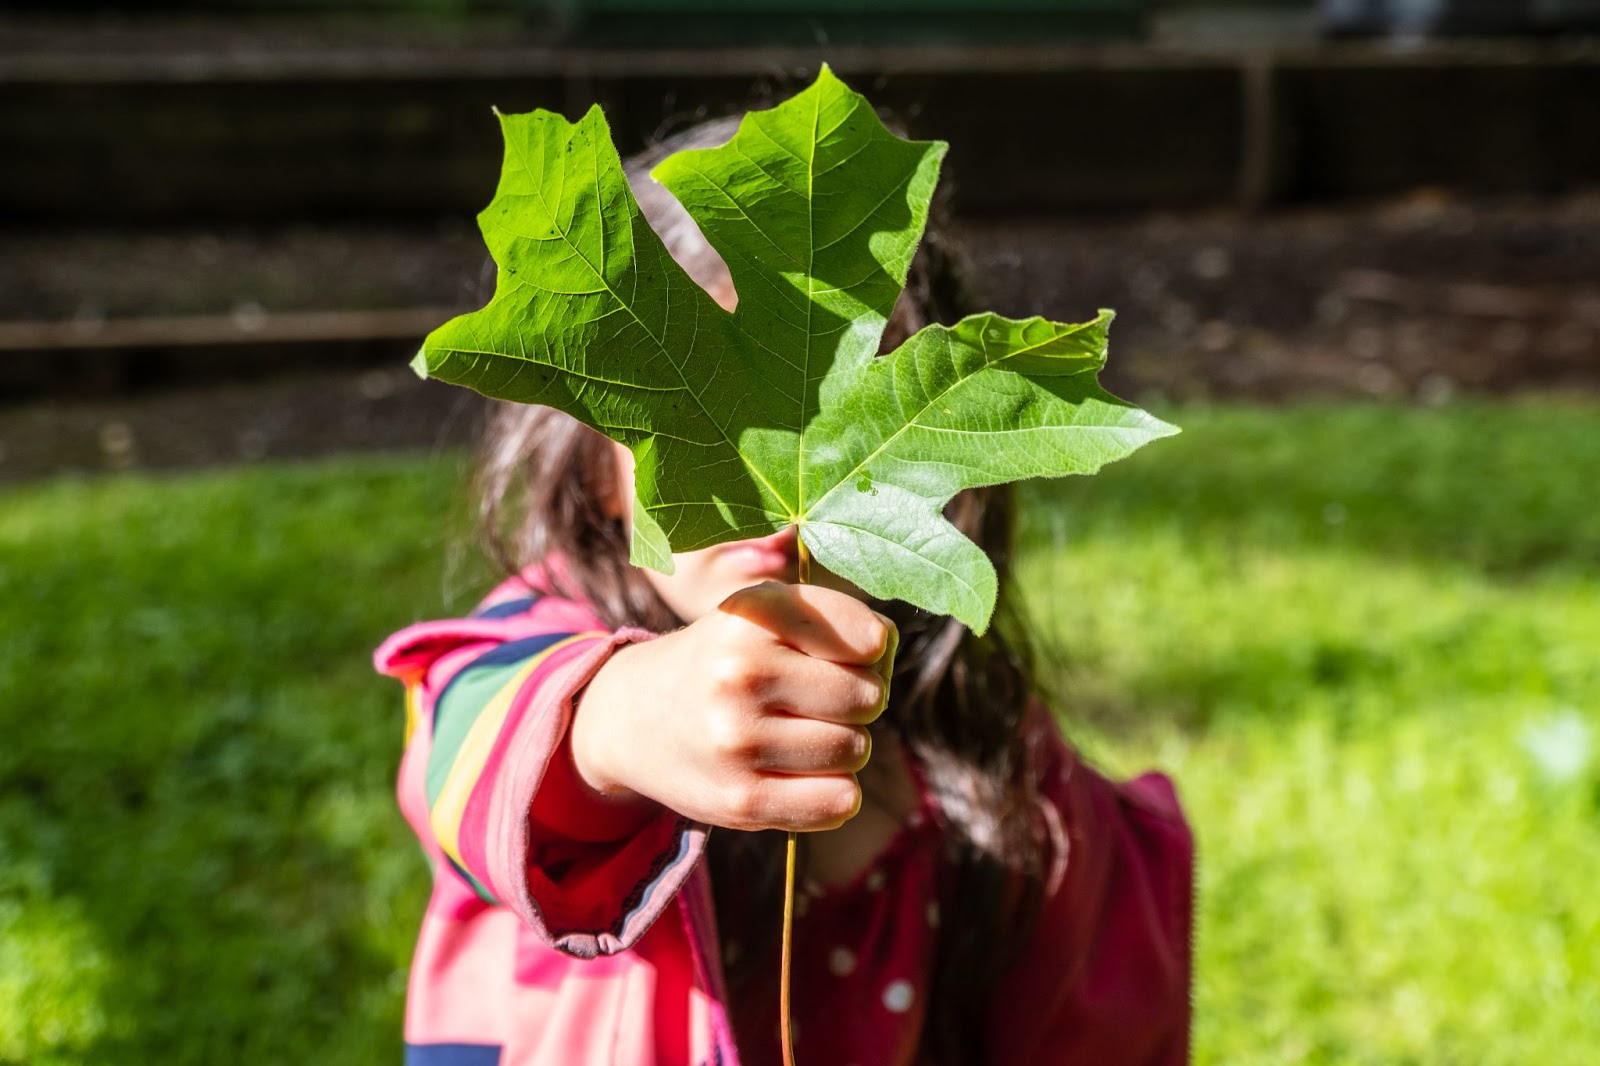 kid outside holding a tree leaf, environment, earth, recycle, sustainable, eco-system